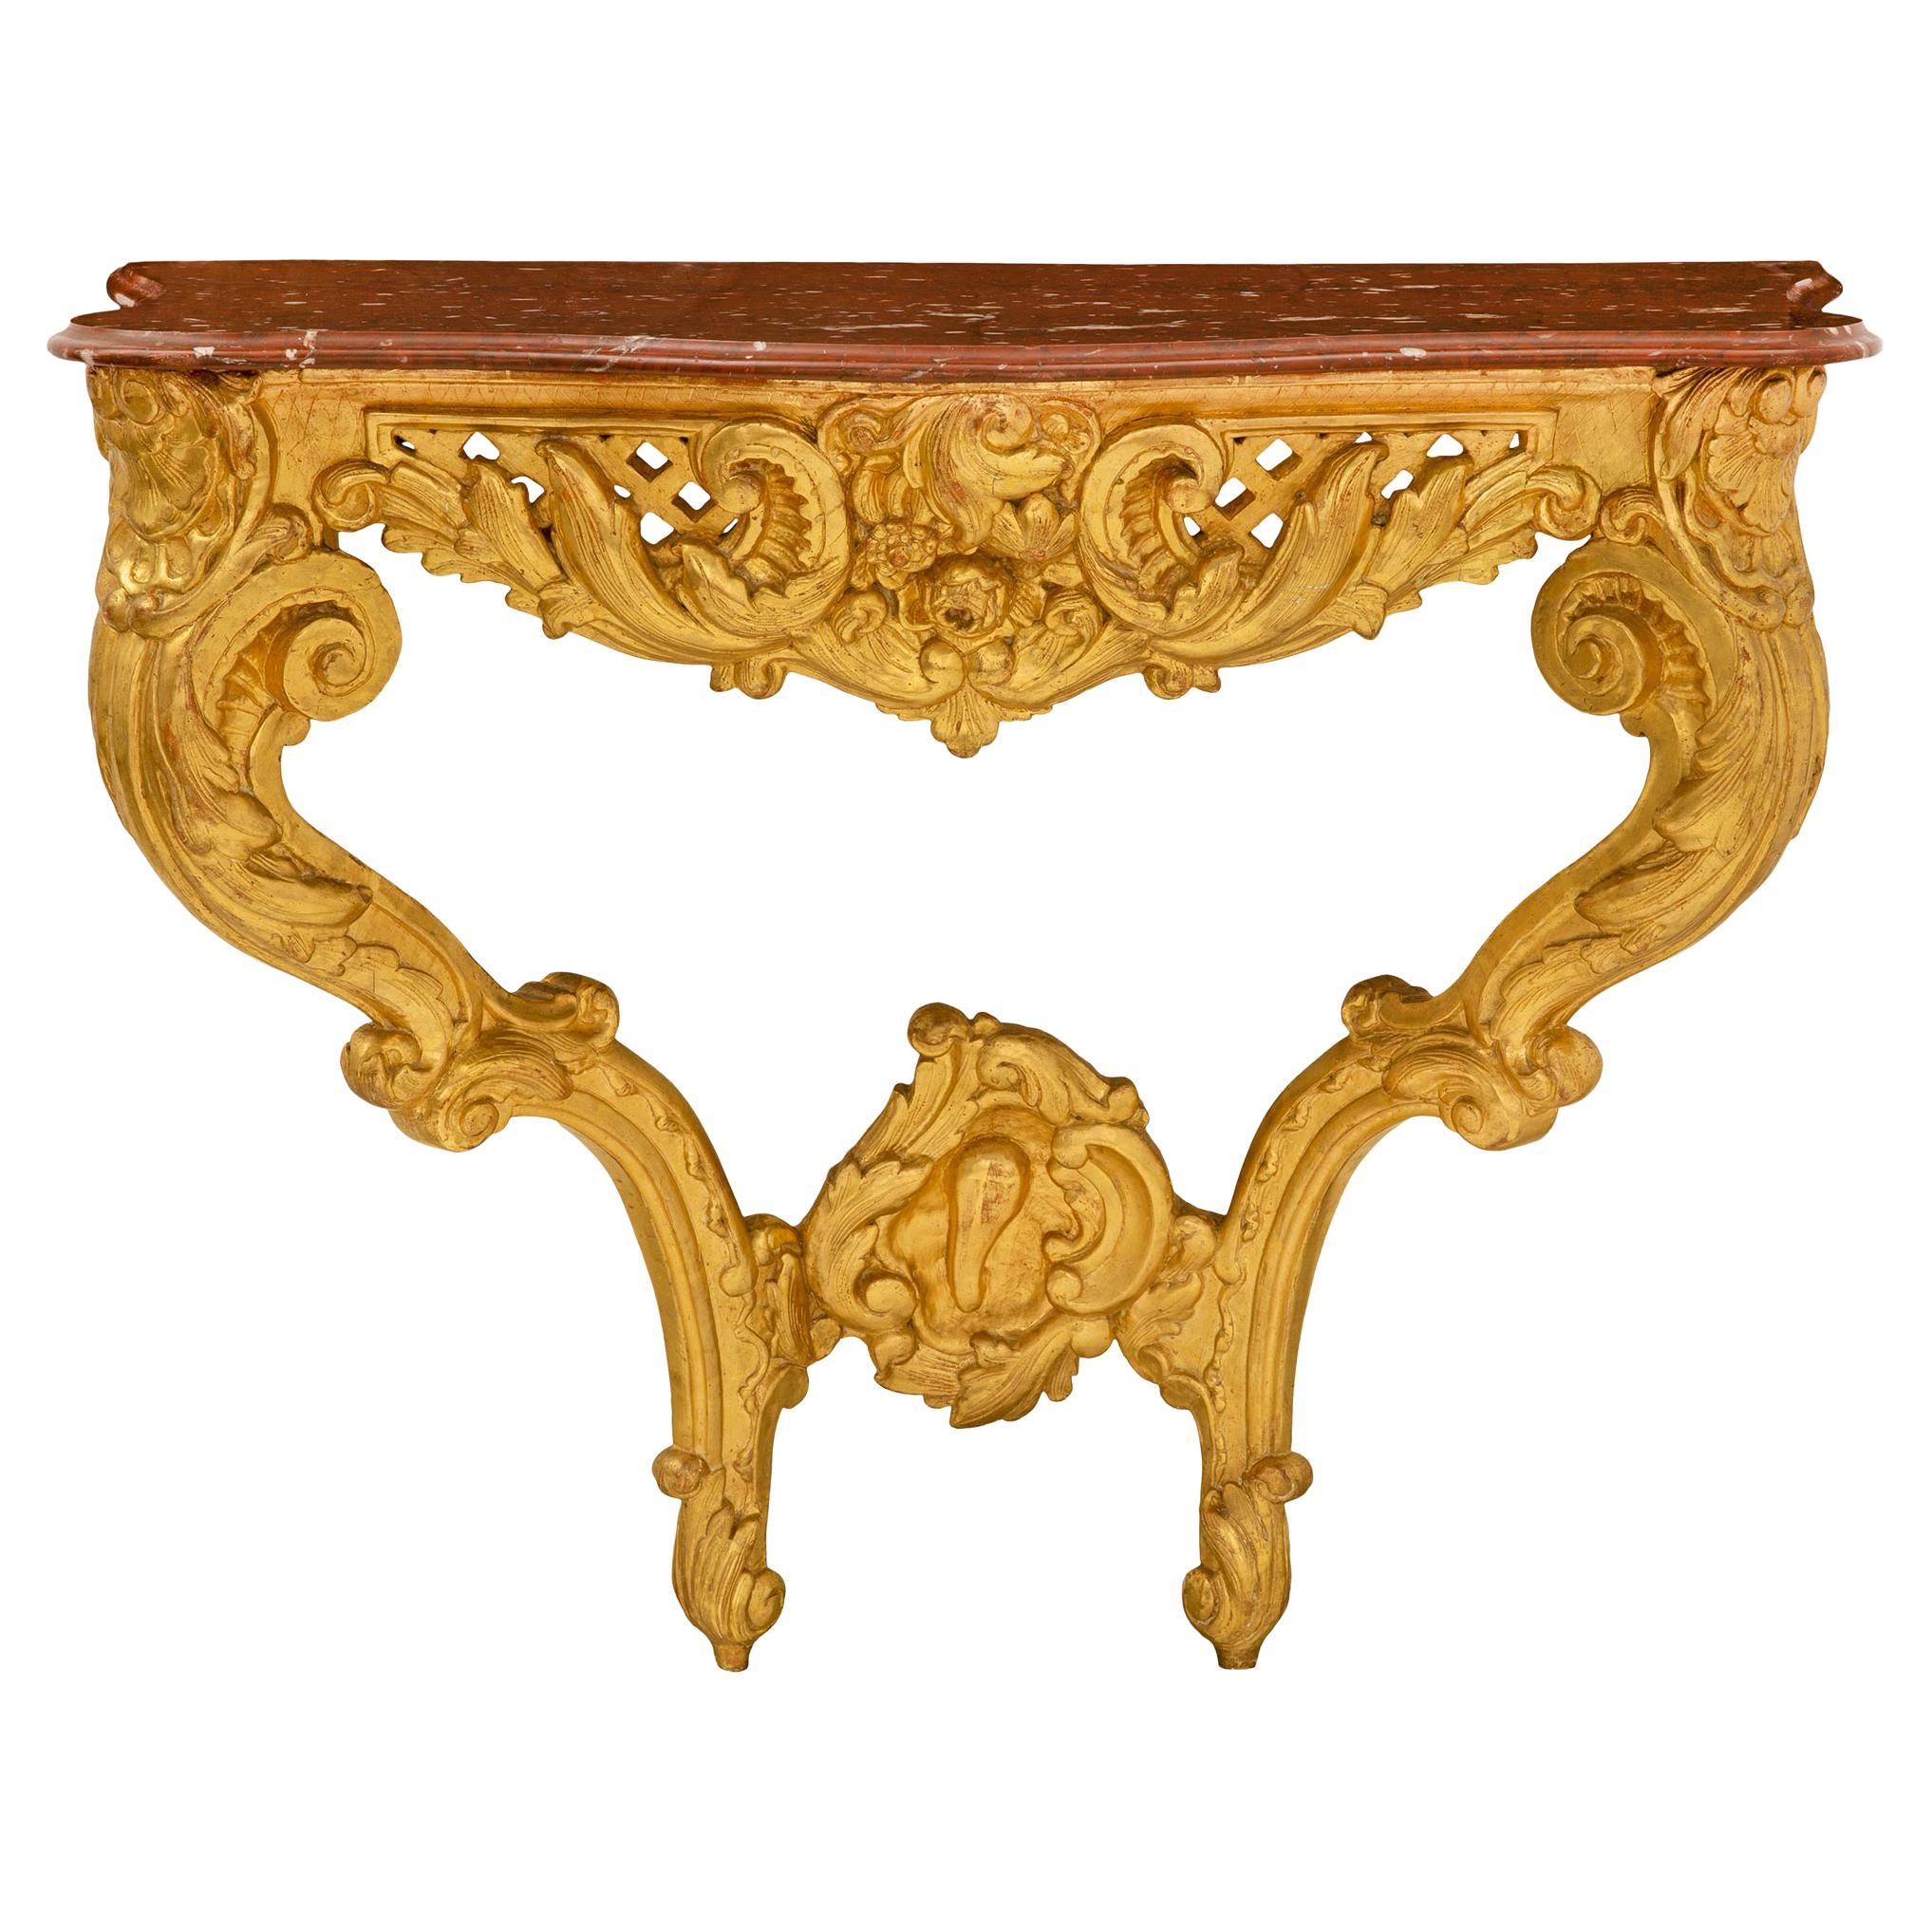 French 18th Century Regence Period Giltwood and Rouge Griotte Marble Console